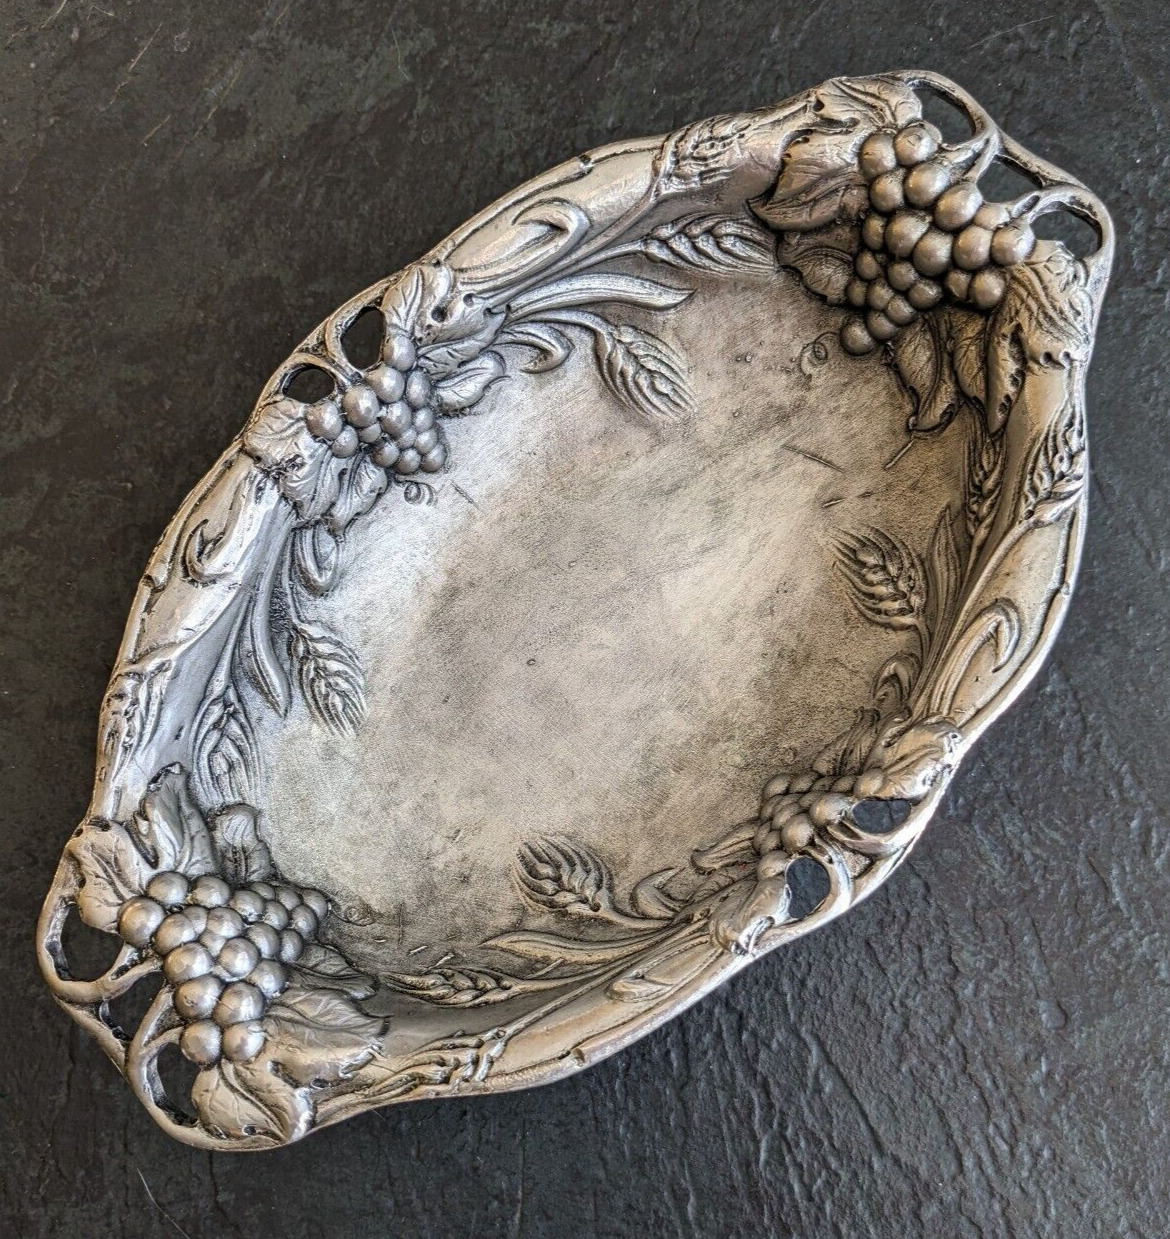 Artina SKS ZINN 95% Pewter Bowl with Grapes Wheat Germany Stamped